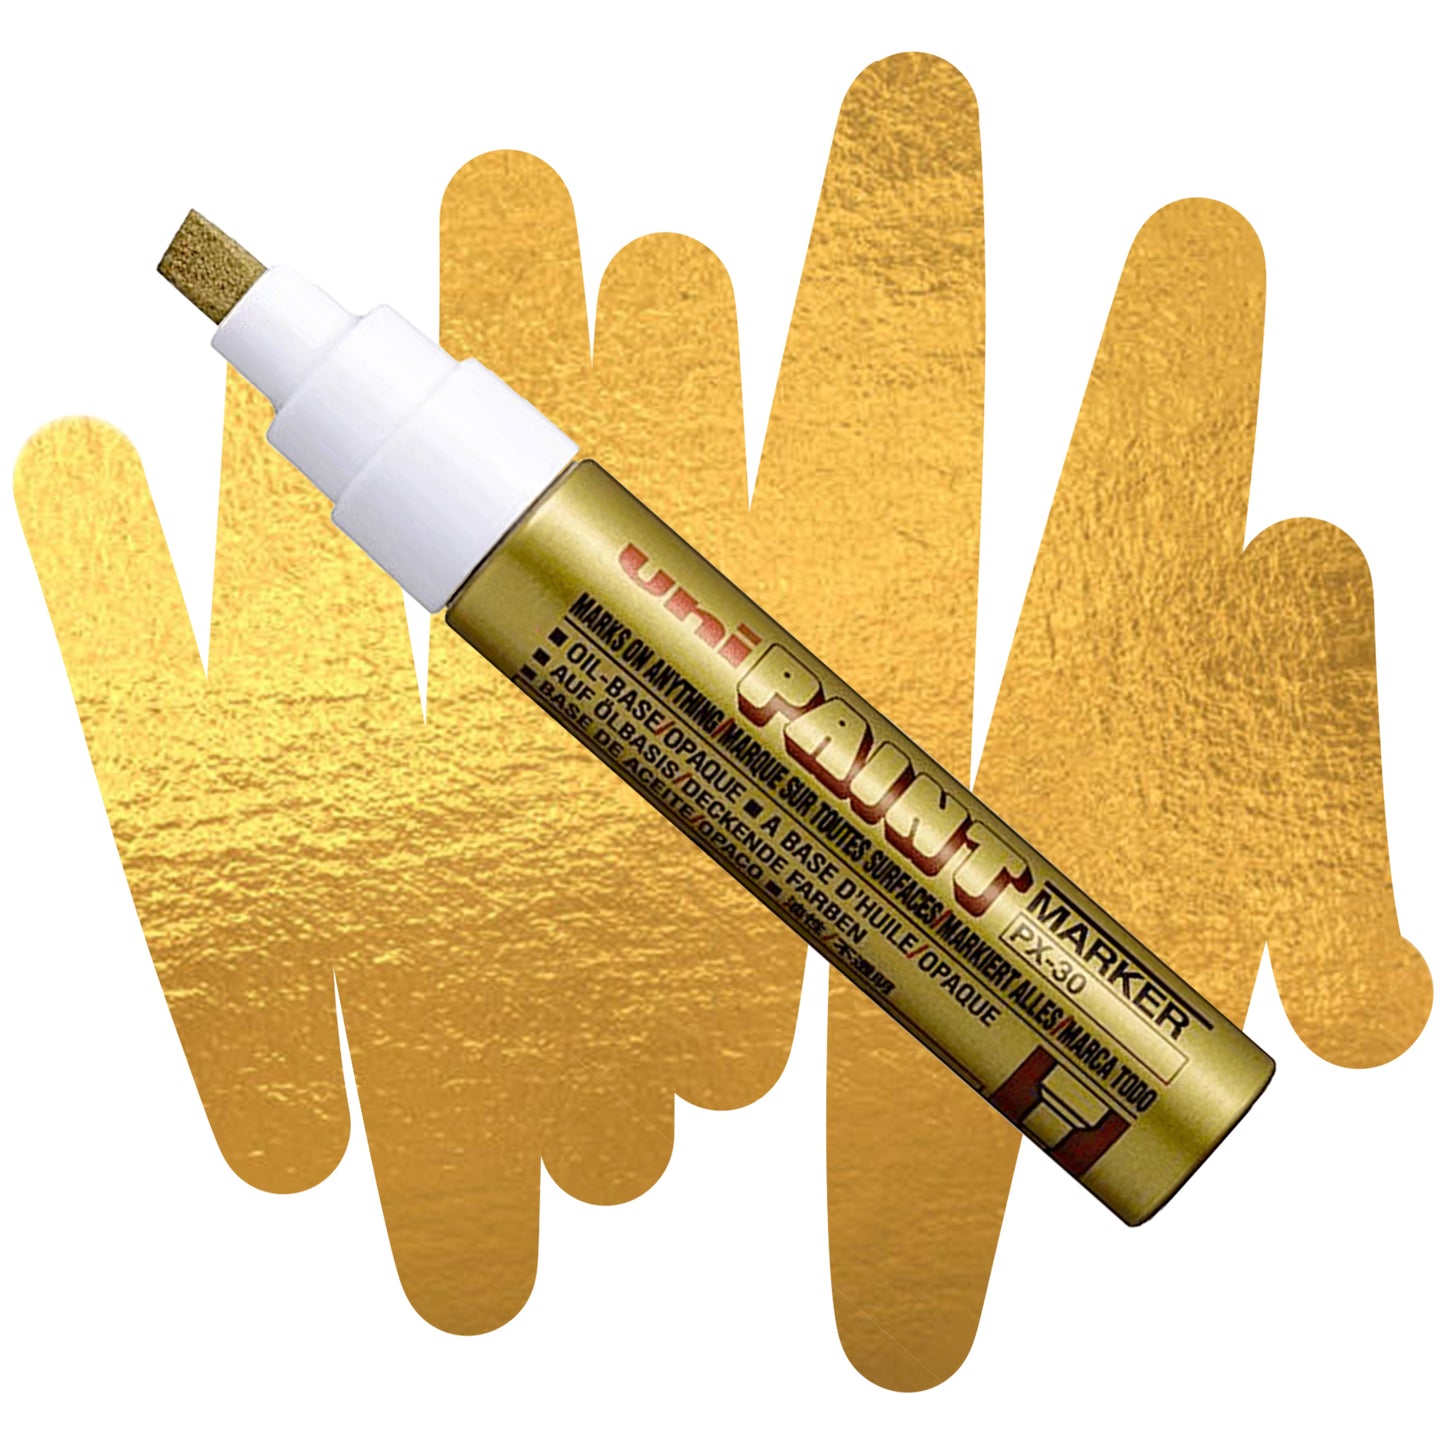 Uni paint chisel tip markers px-30 in gold.